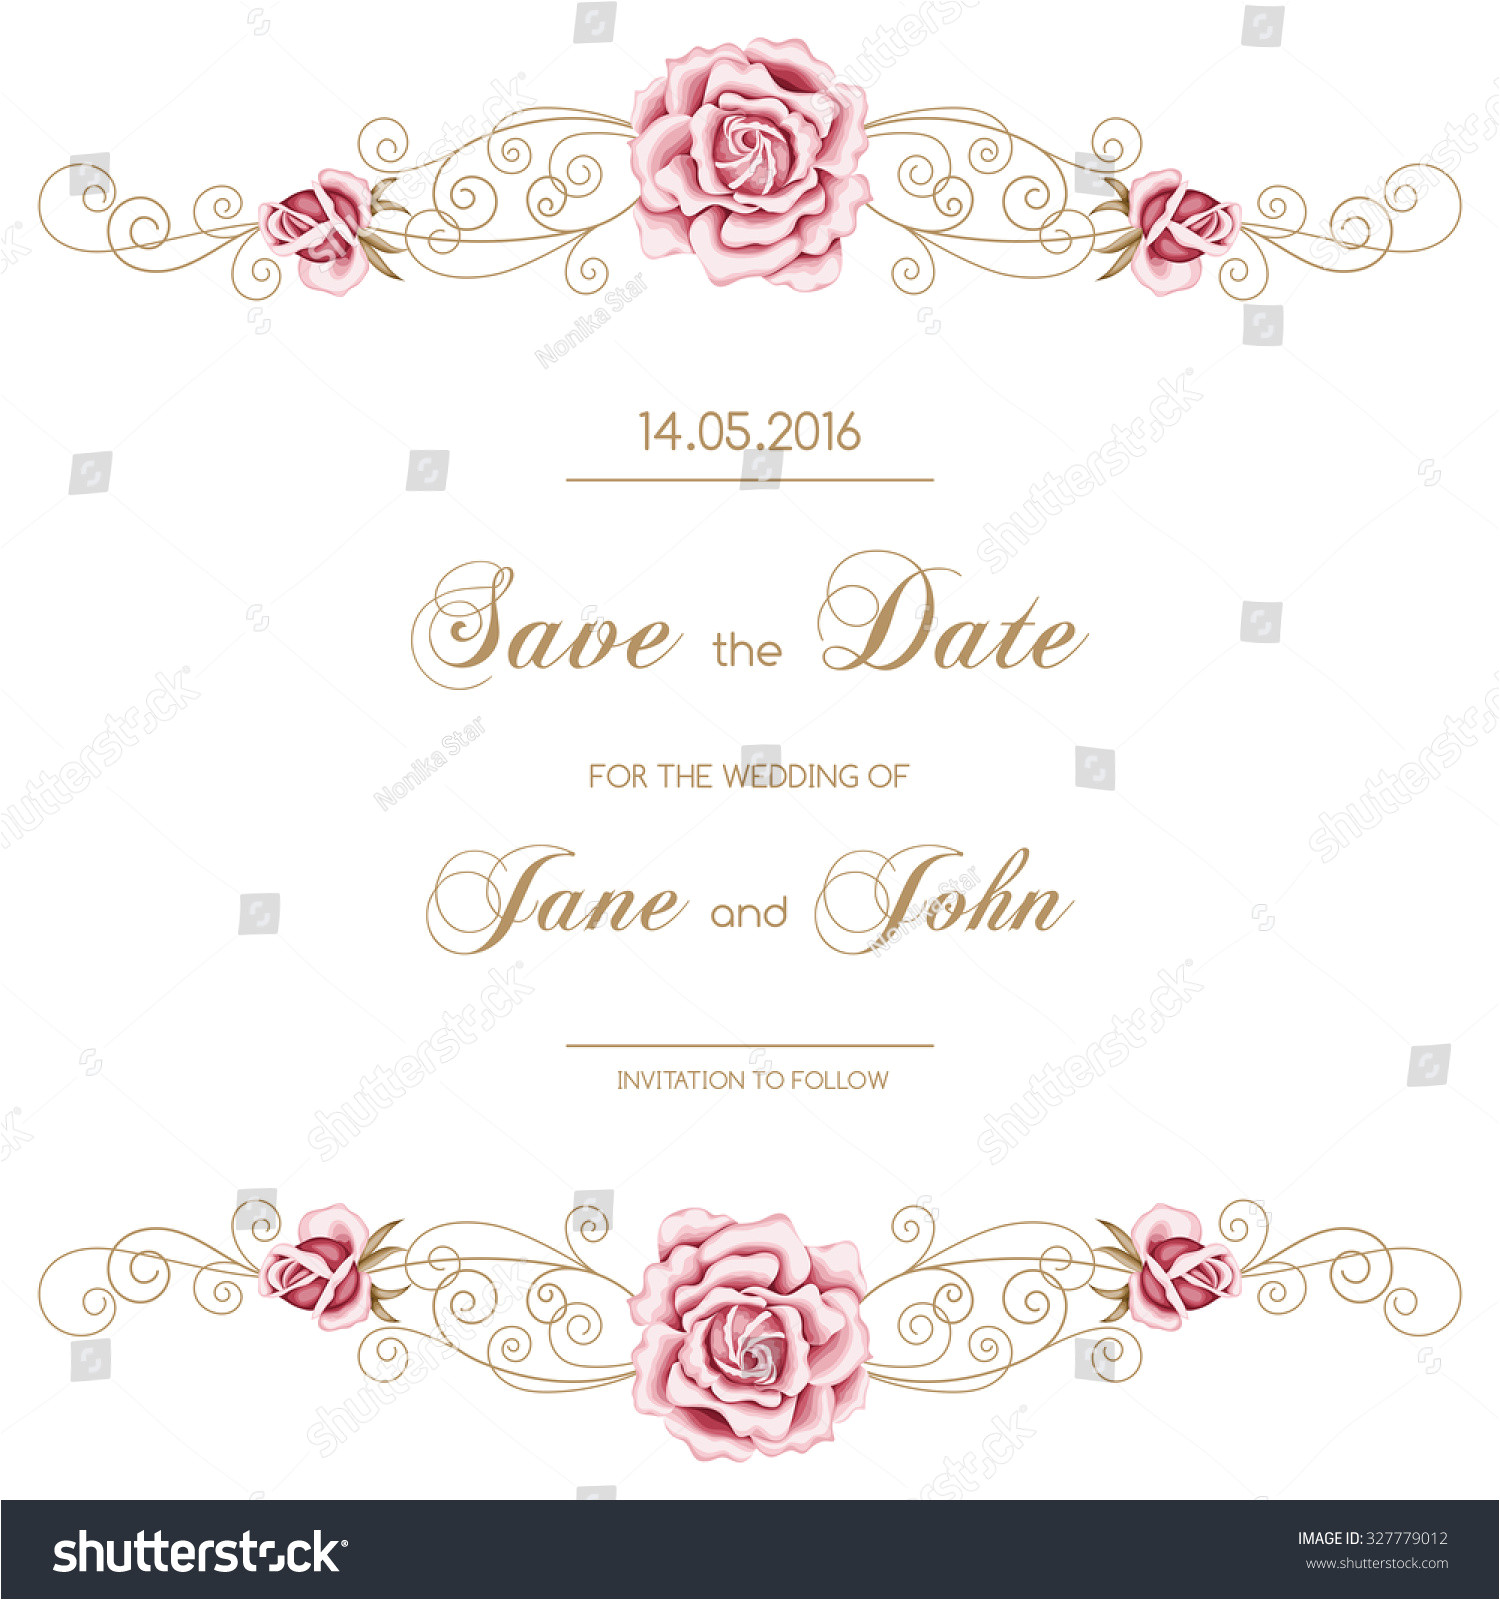 stock vector vintage wedding invitation with roses invitation template with gold curling frame save the date